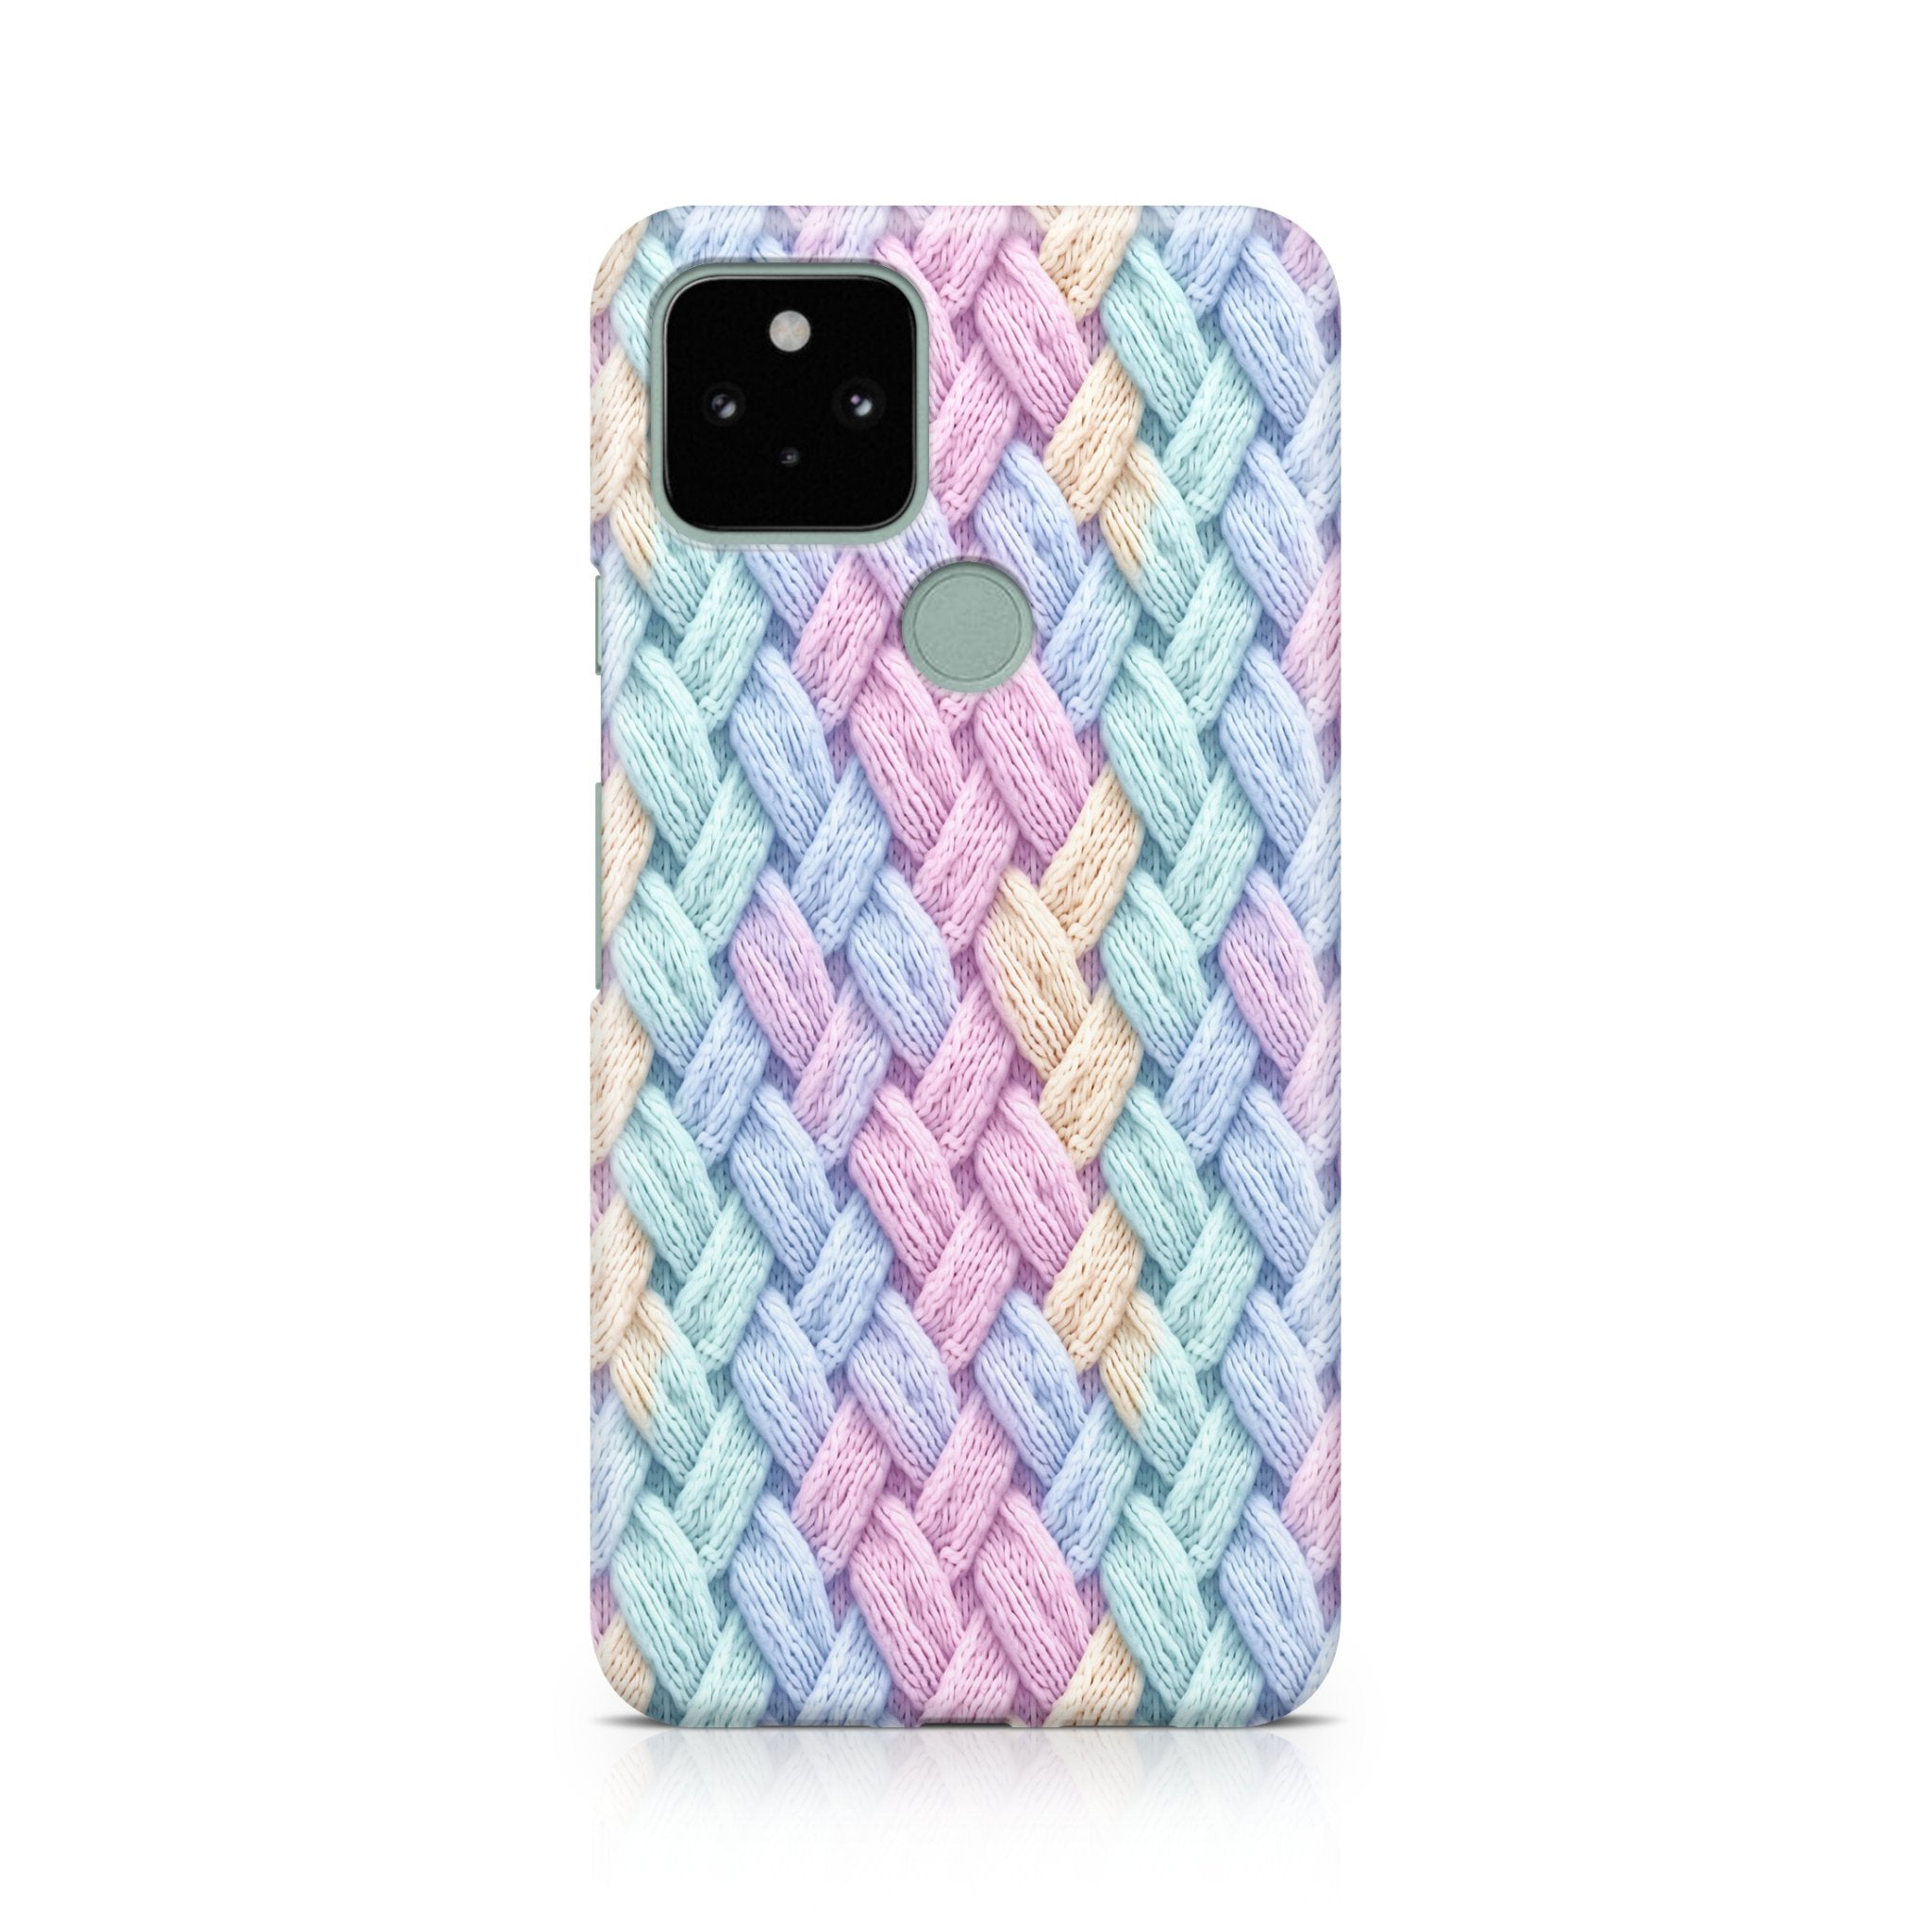 Whimsical Threads - Google phone case designs by CaseSwagger